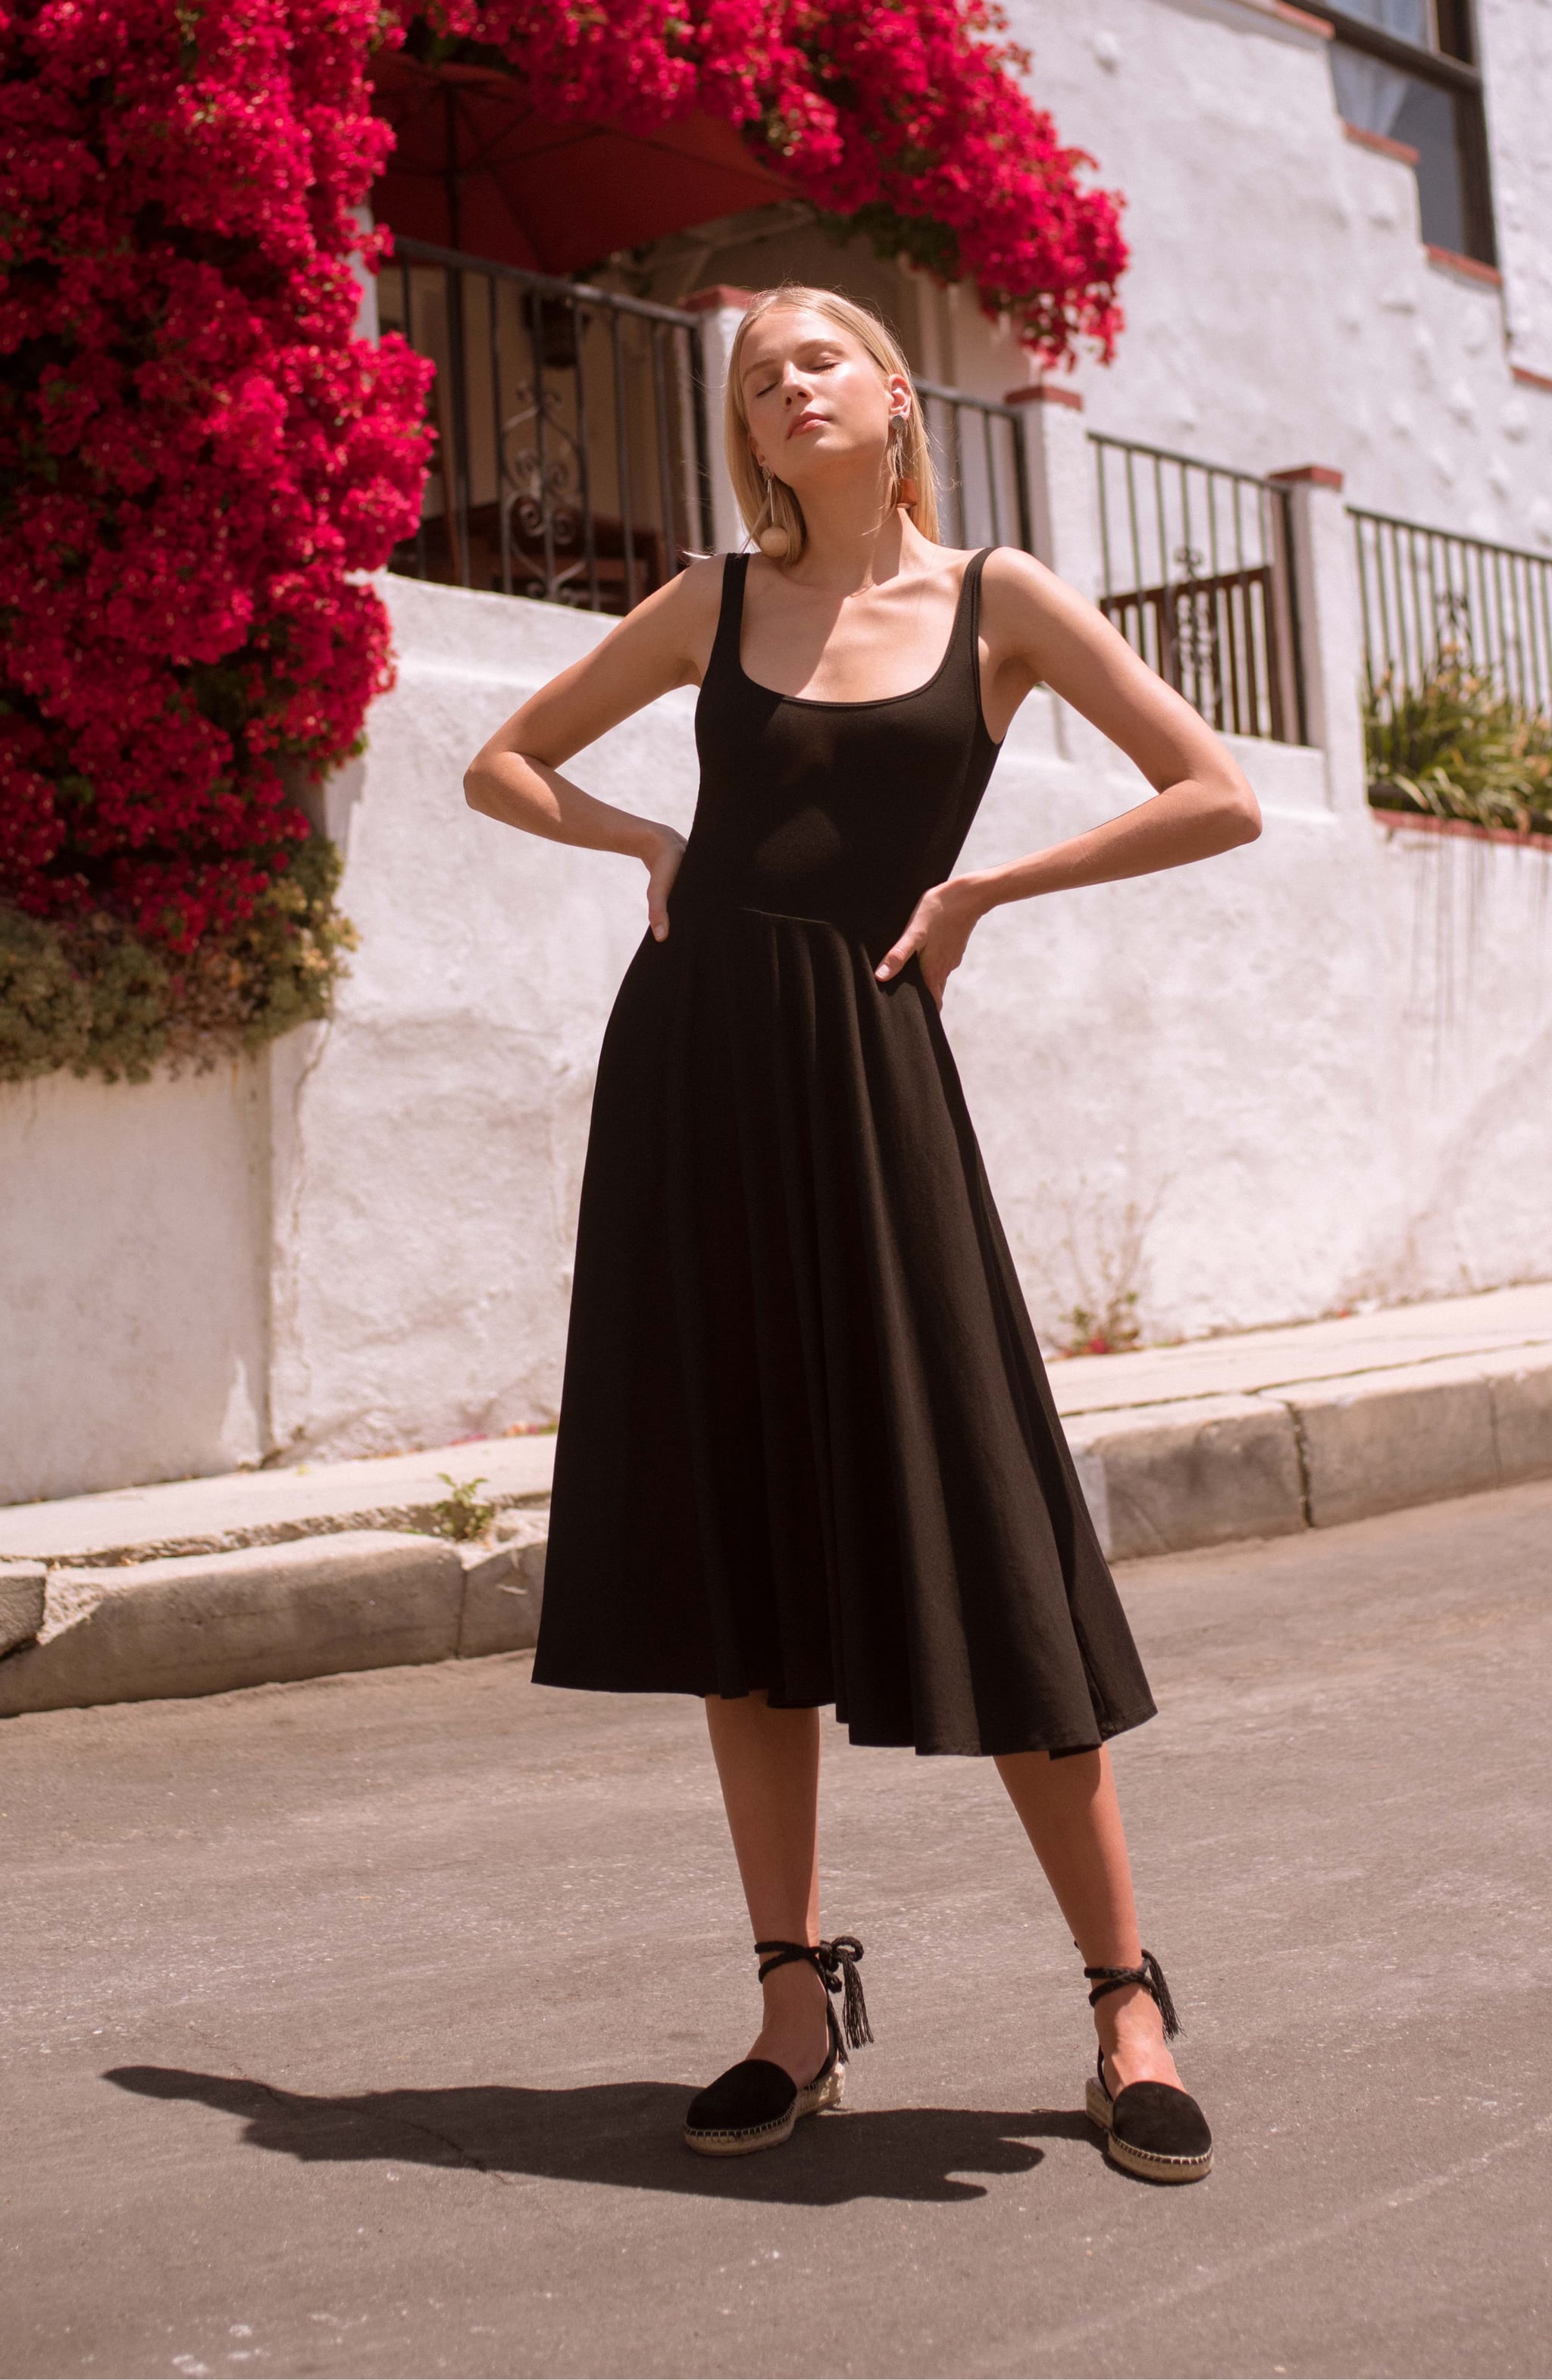 Reformation Rou Midi Fit & Flare Dress, If You Can't Stand to Look at Your  Sweatpants Anymore, Have You Tried a Dress?